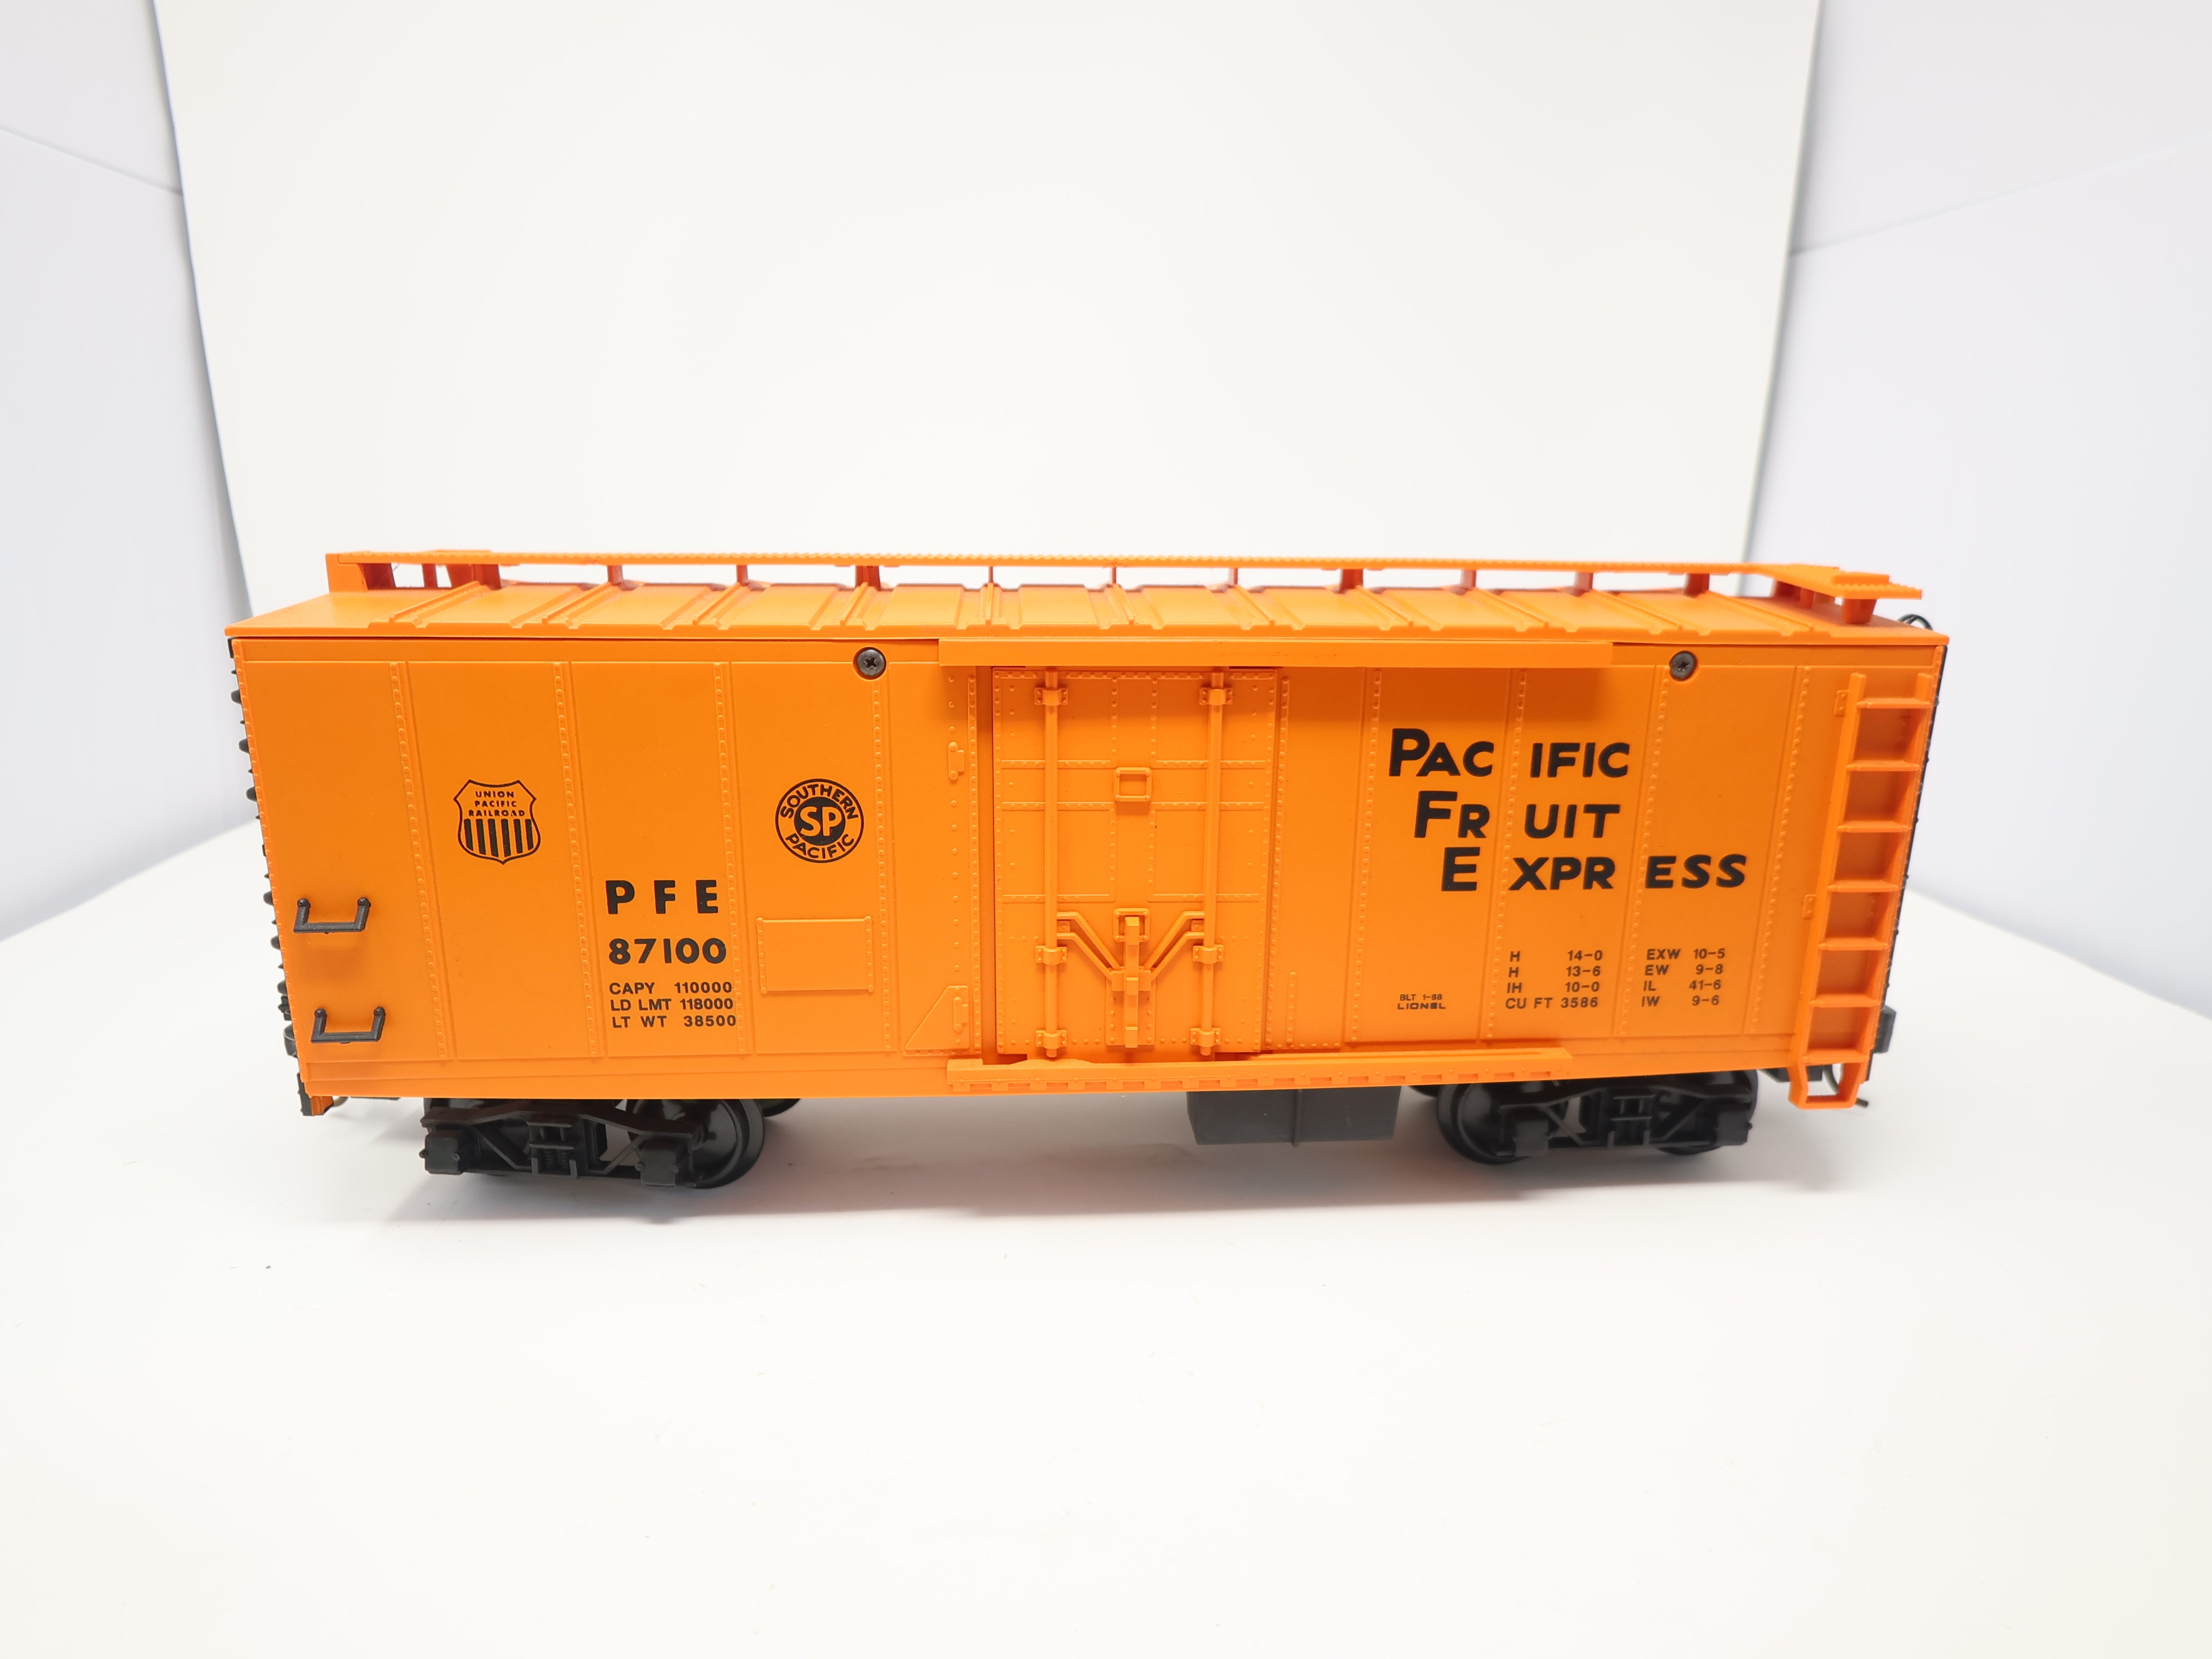 USED Lionel 8-87100 G Scale, Reefer Box Car, Pacific Fruit Express PFE #87100